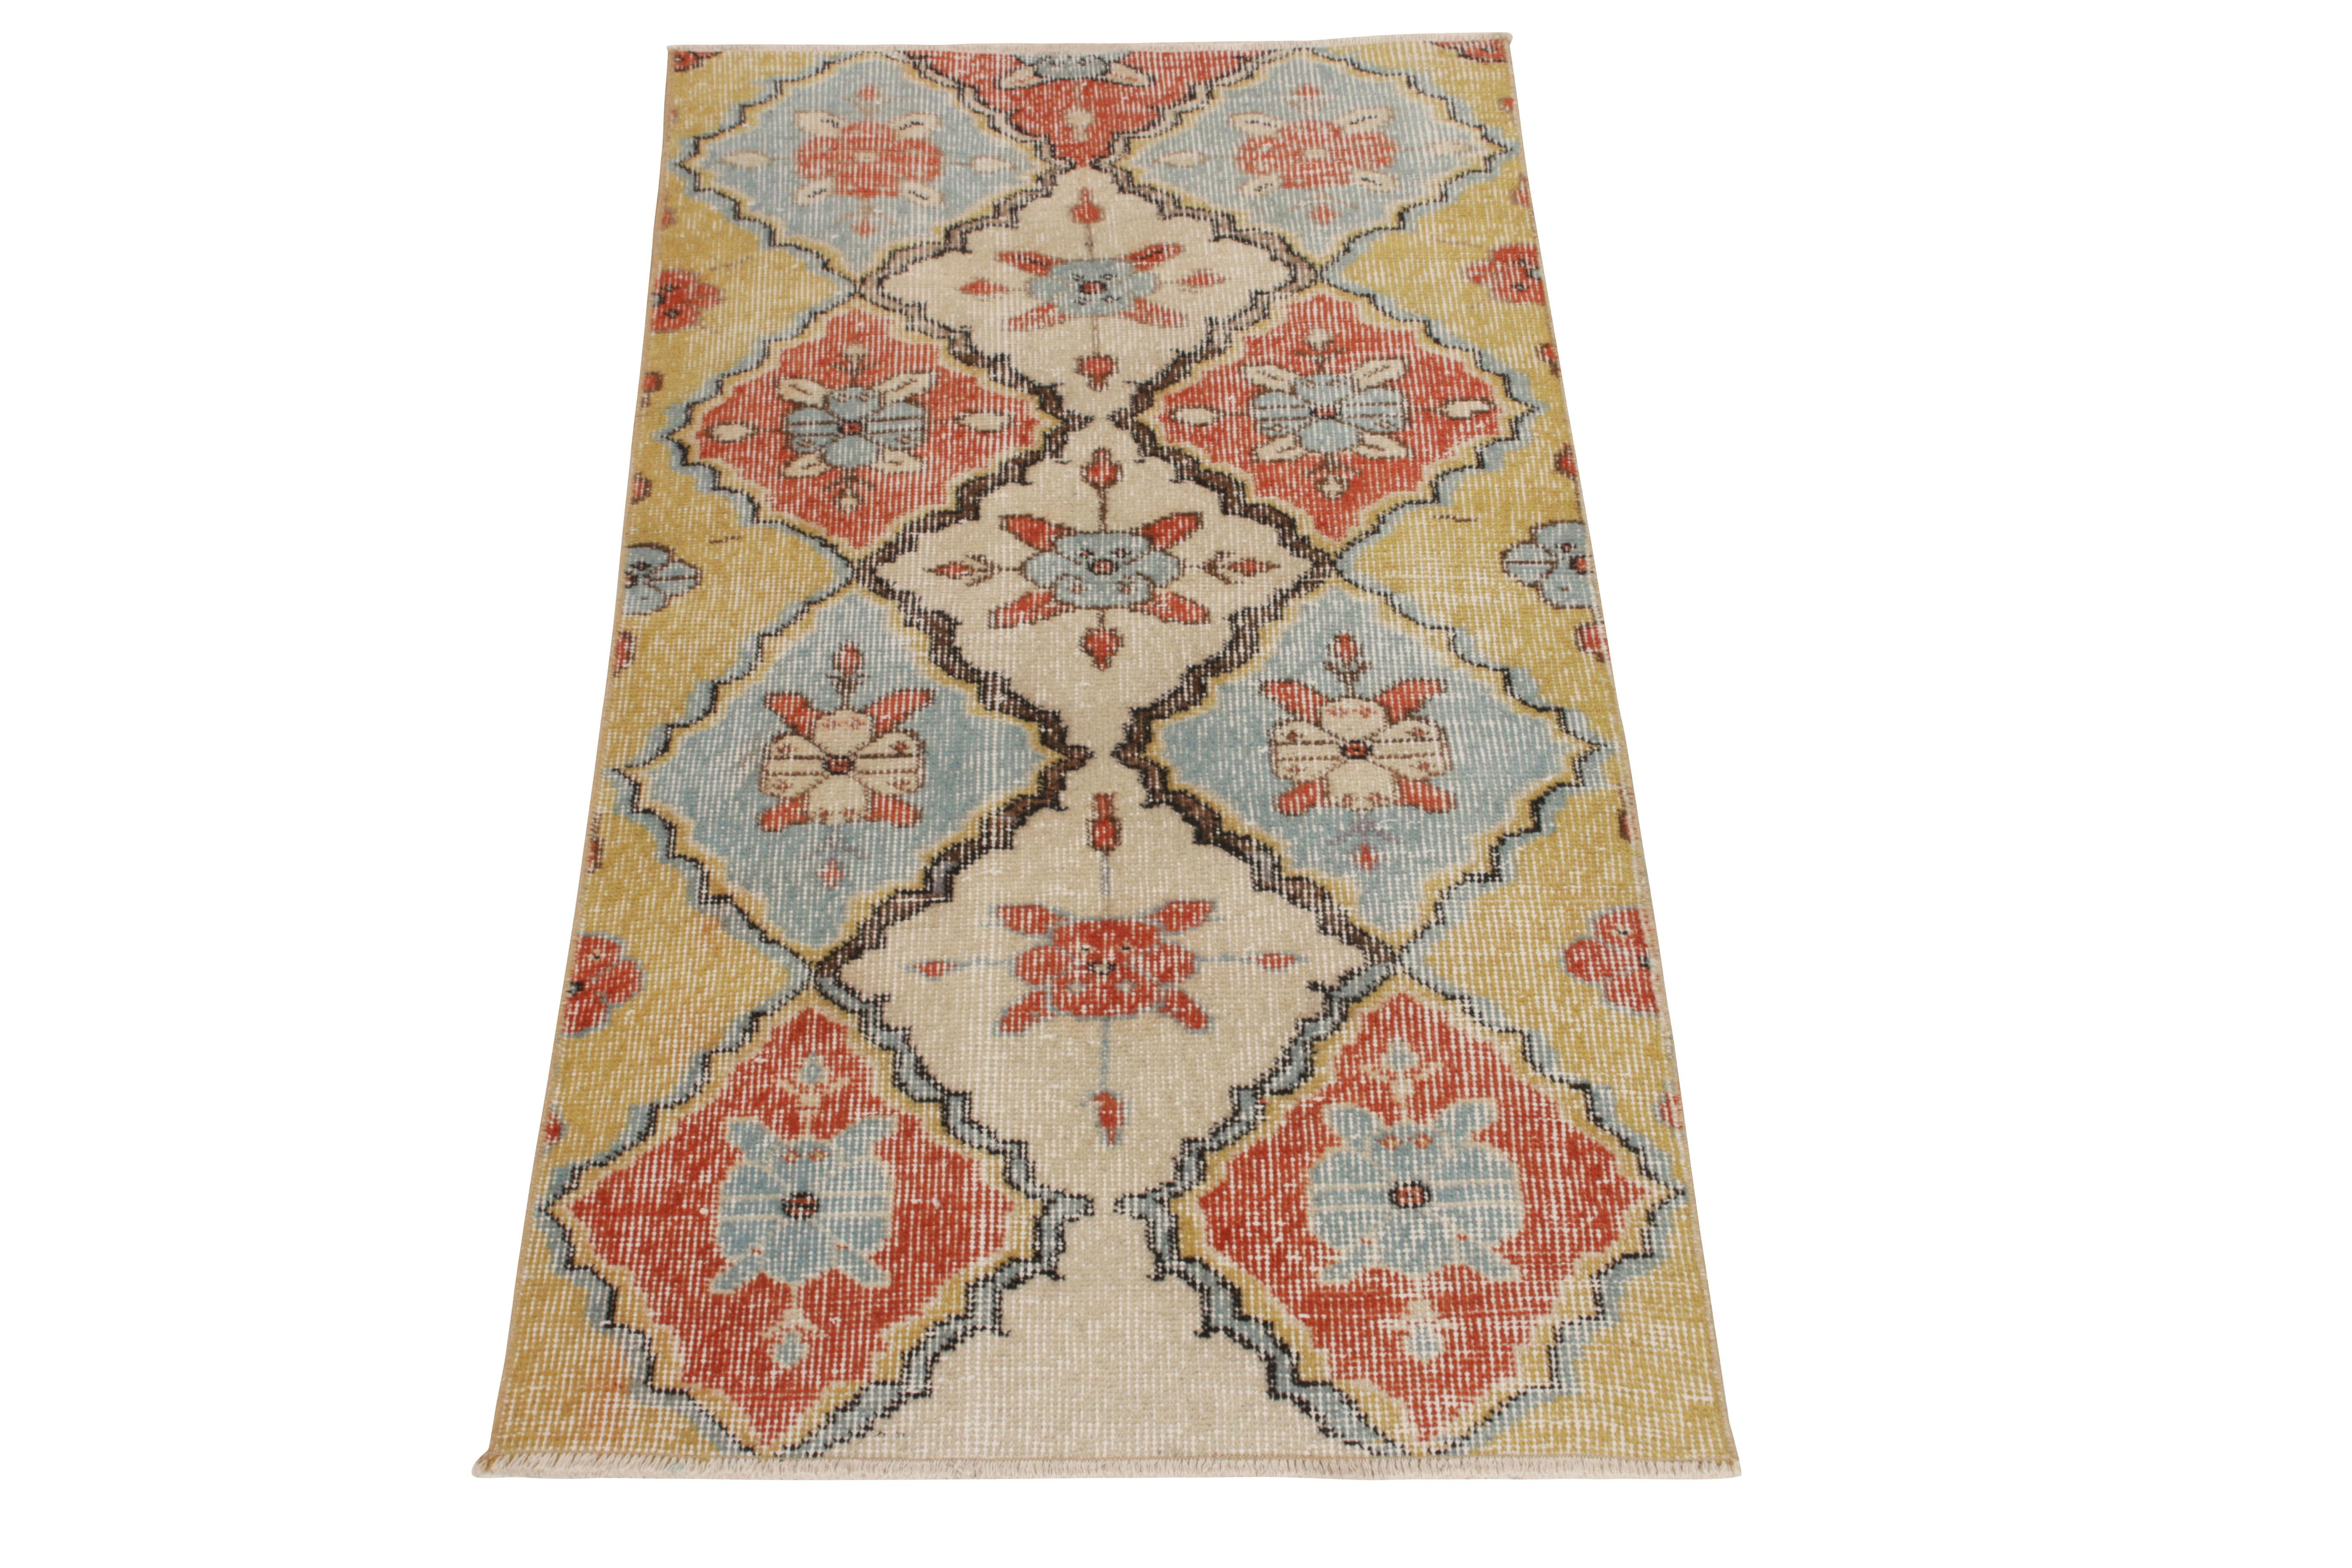 Hand-knotted in wool circa 1950-1960, a 2x5 vintage Deco rug from an acclaimed Turkish designer entering Rug & Kilim’s commemorative Mid-Century Pasha Collection. The vision relishes a series of diamond patterns in bright orange, mustard and canary